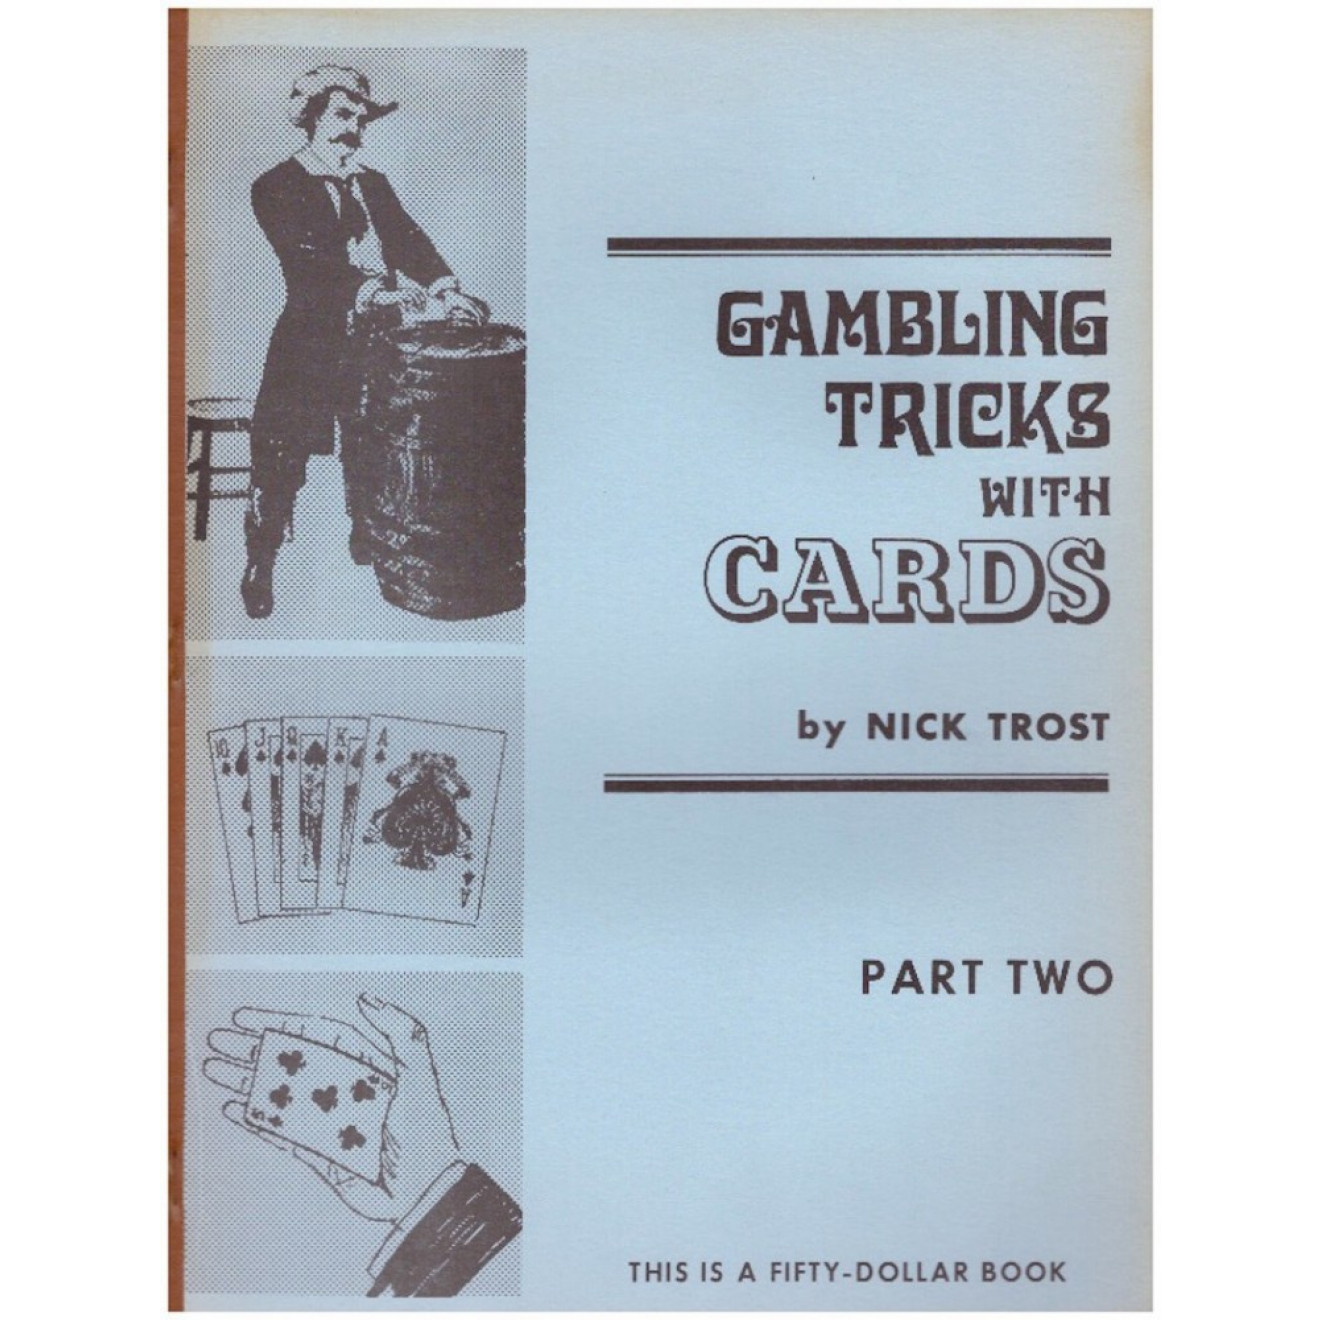 Gambling Tricks with Cards (Part Two)